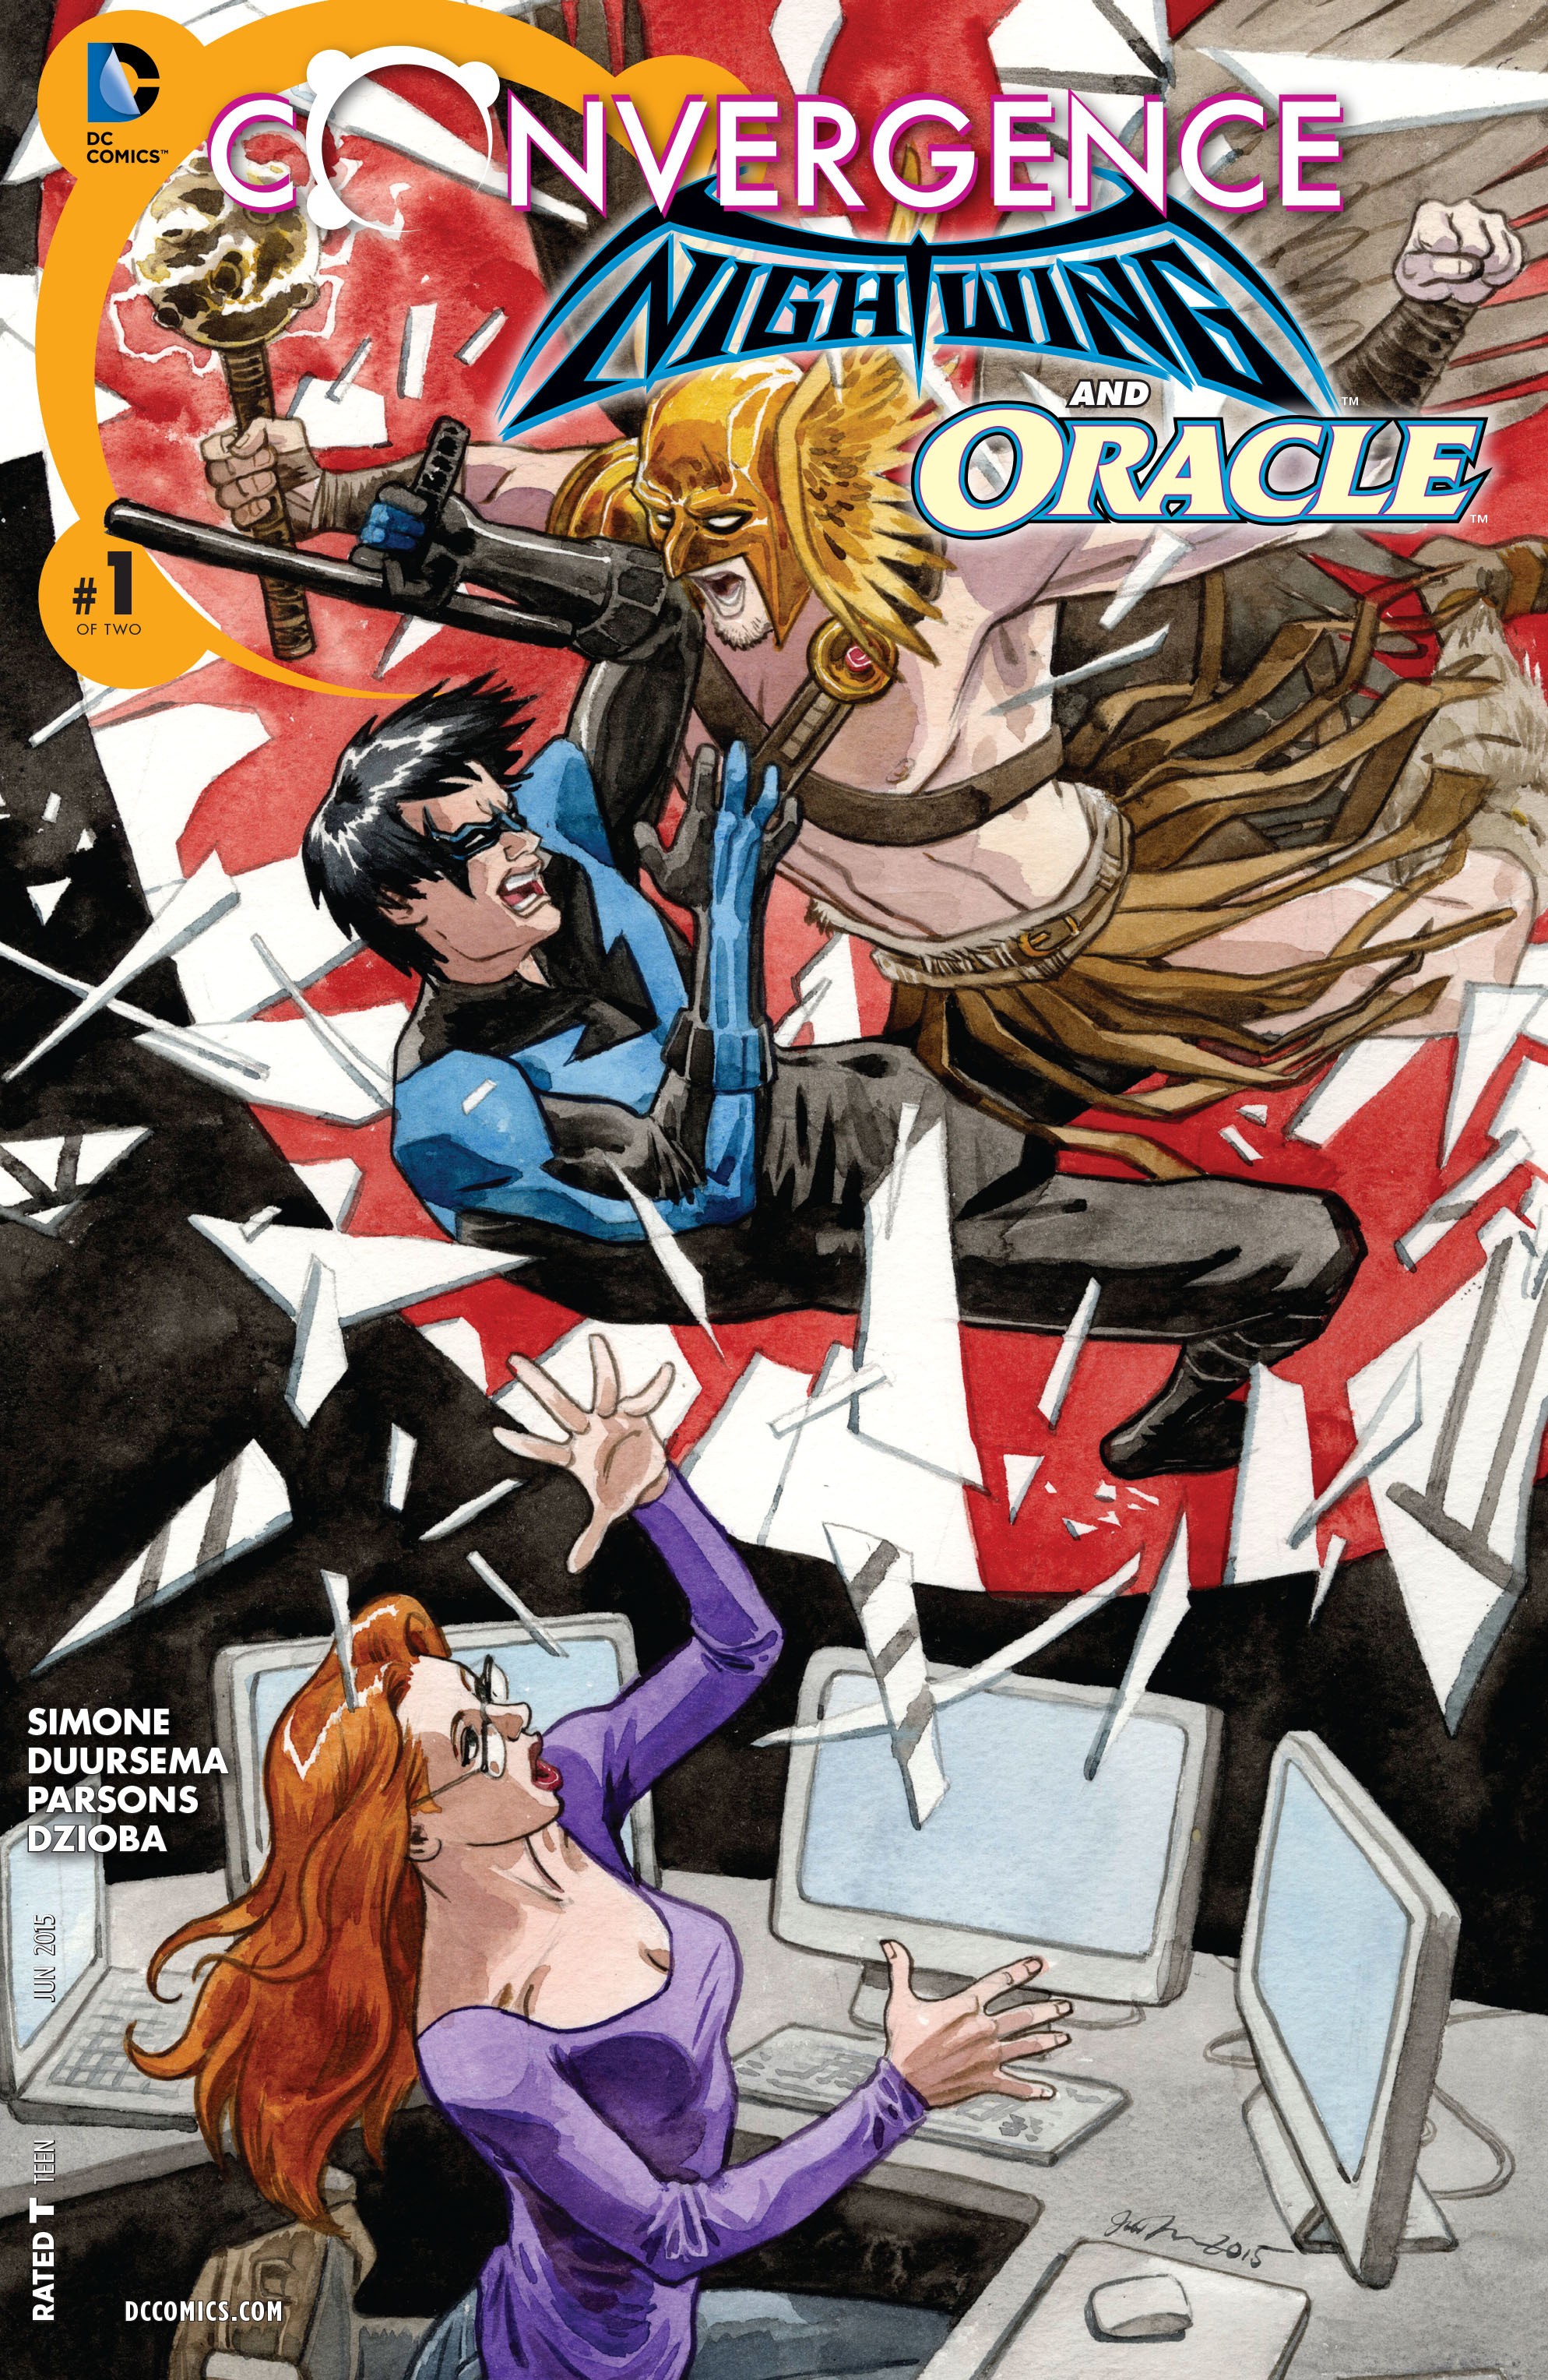 Convergence: Nightwing/Oracle Vol. 1 #1